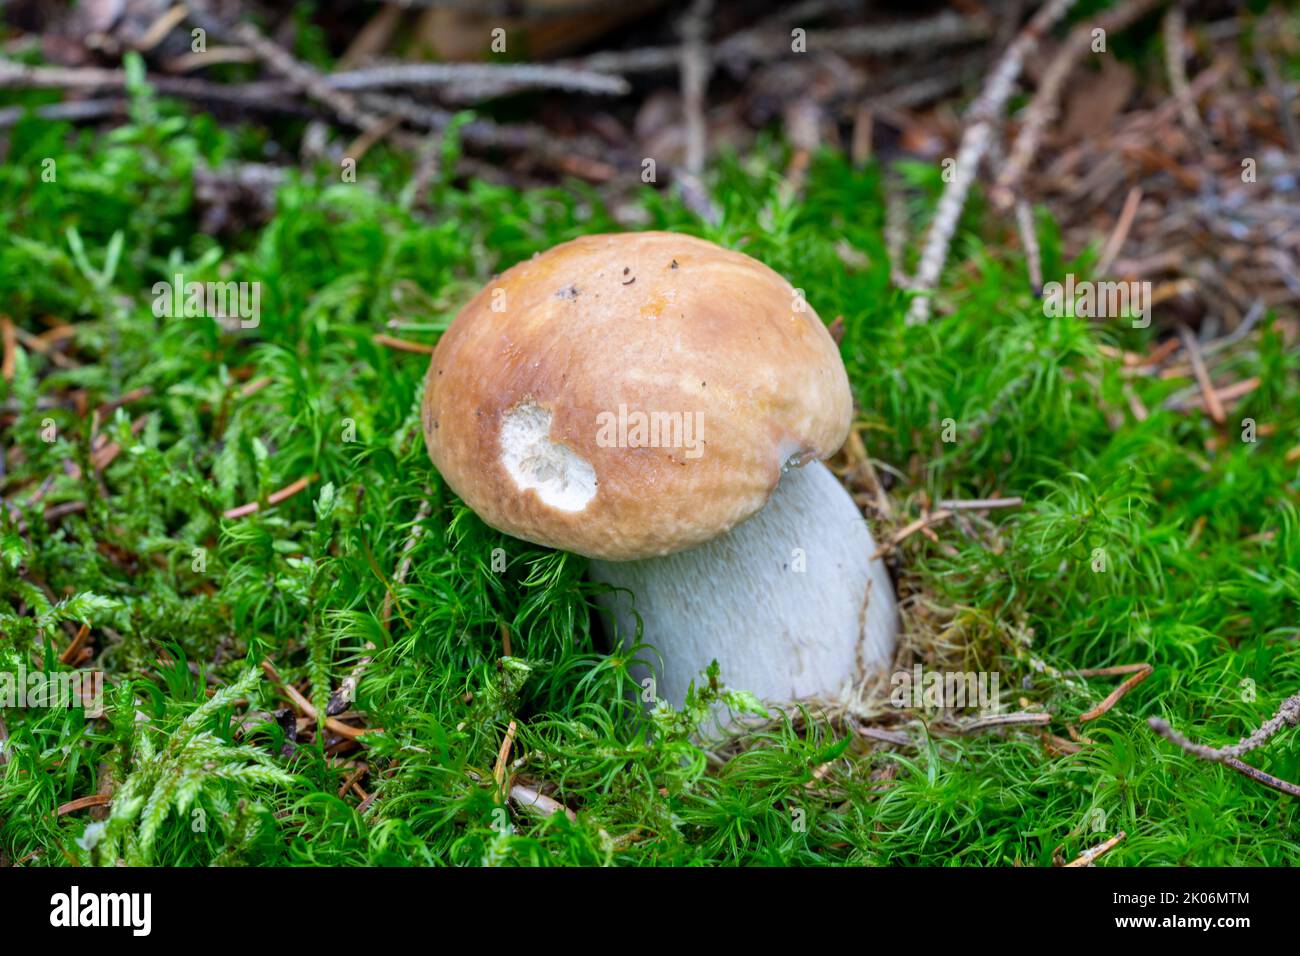 young porcini mushroom in the moss Stock Photo